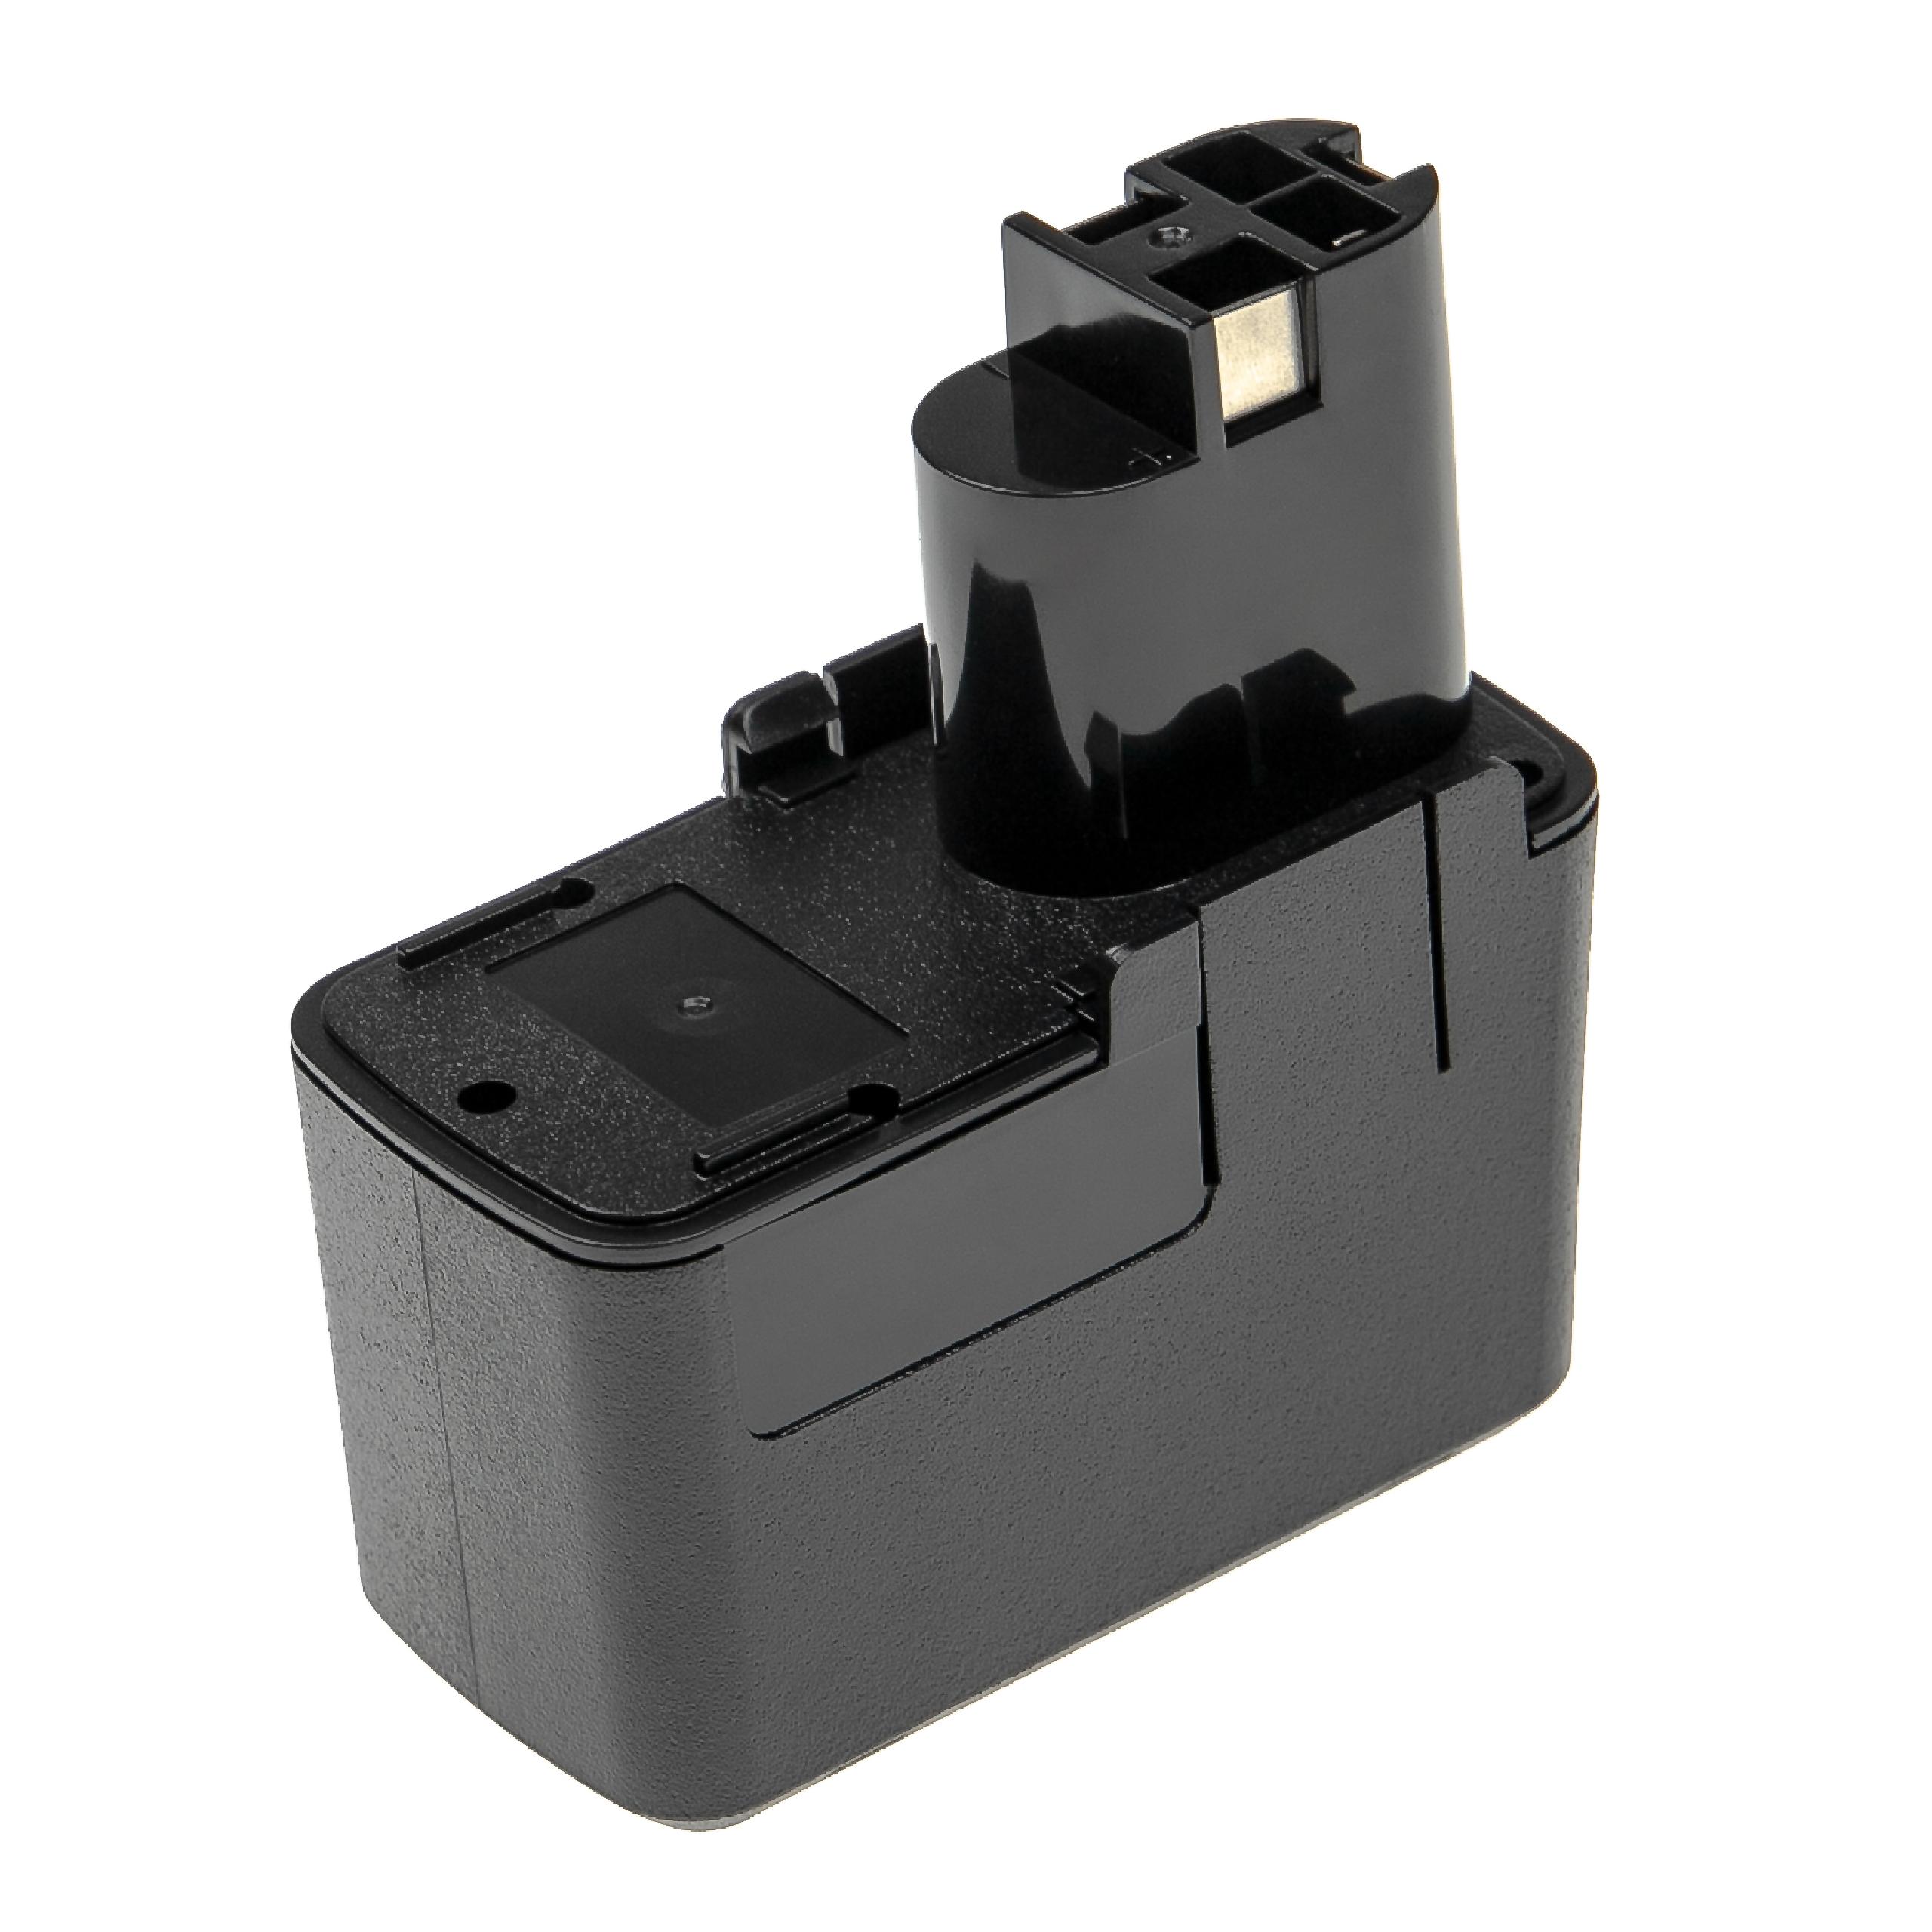 Electric Power Tool Battery Replaces Bosch 2 607 335 054, 2 607 335 055, 2 607 335 071 - 2100 mAh, 12 V, NiMH